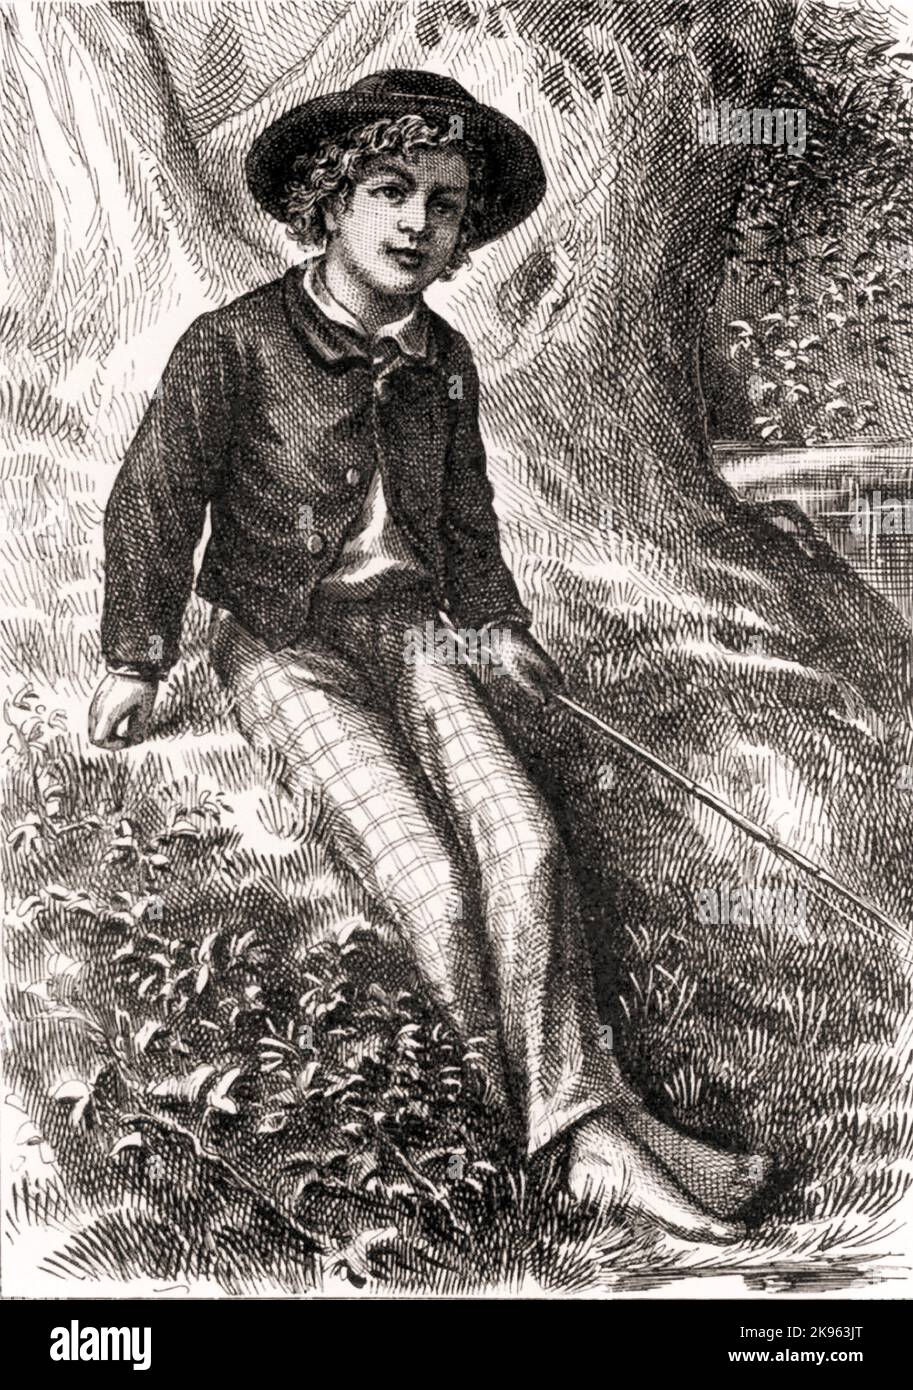 Book Adventures of Tom Sawyer By Mark Twain 1876 frontispiece Stock Photo